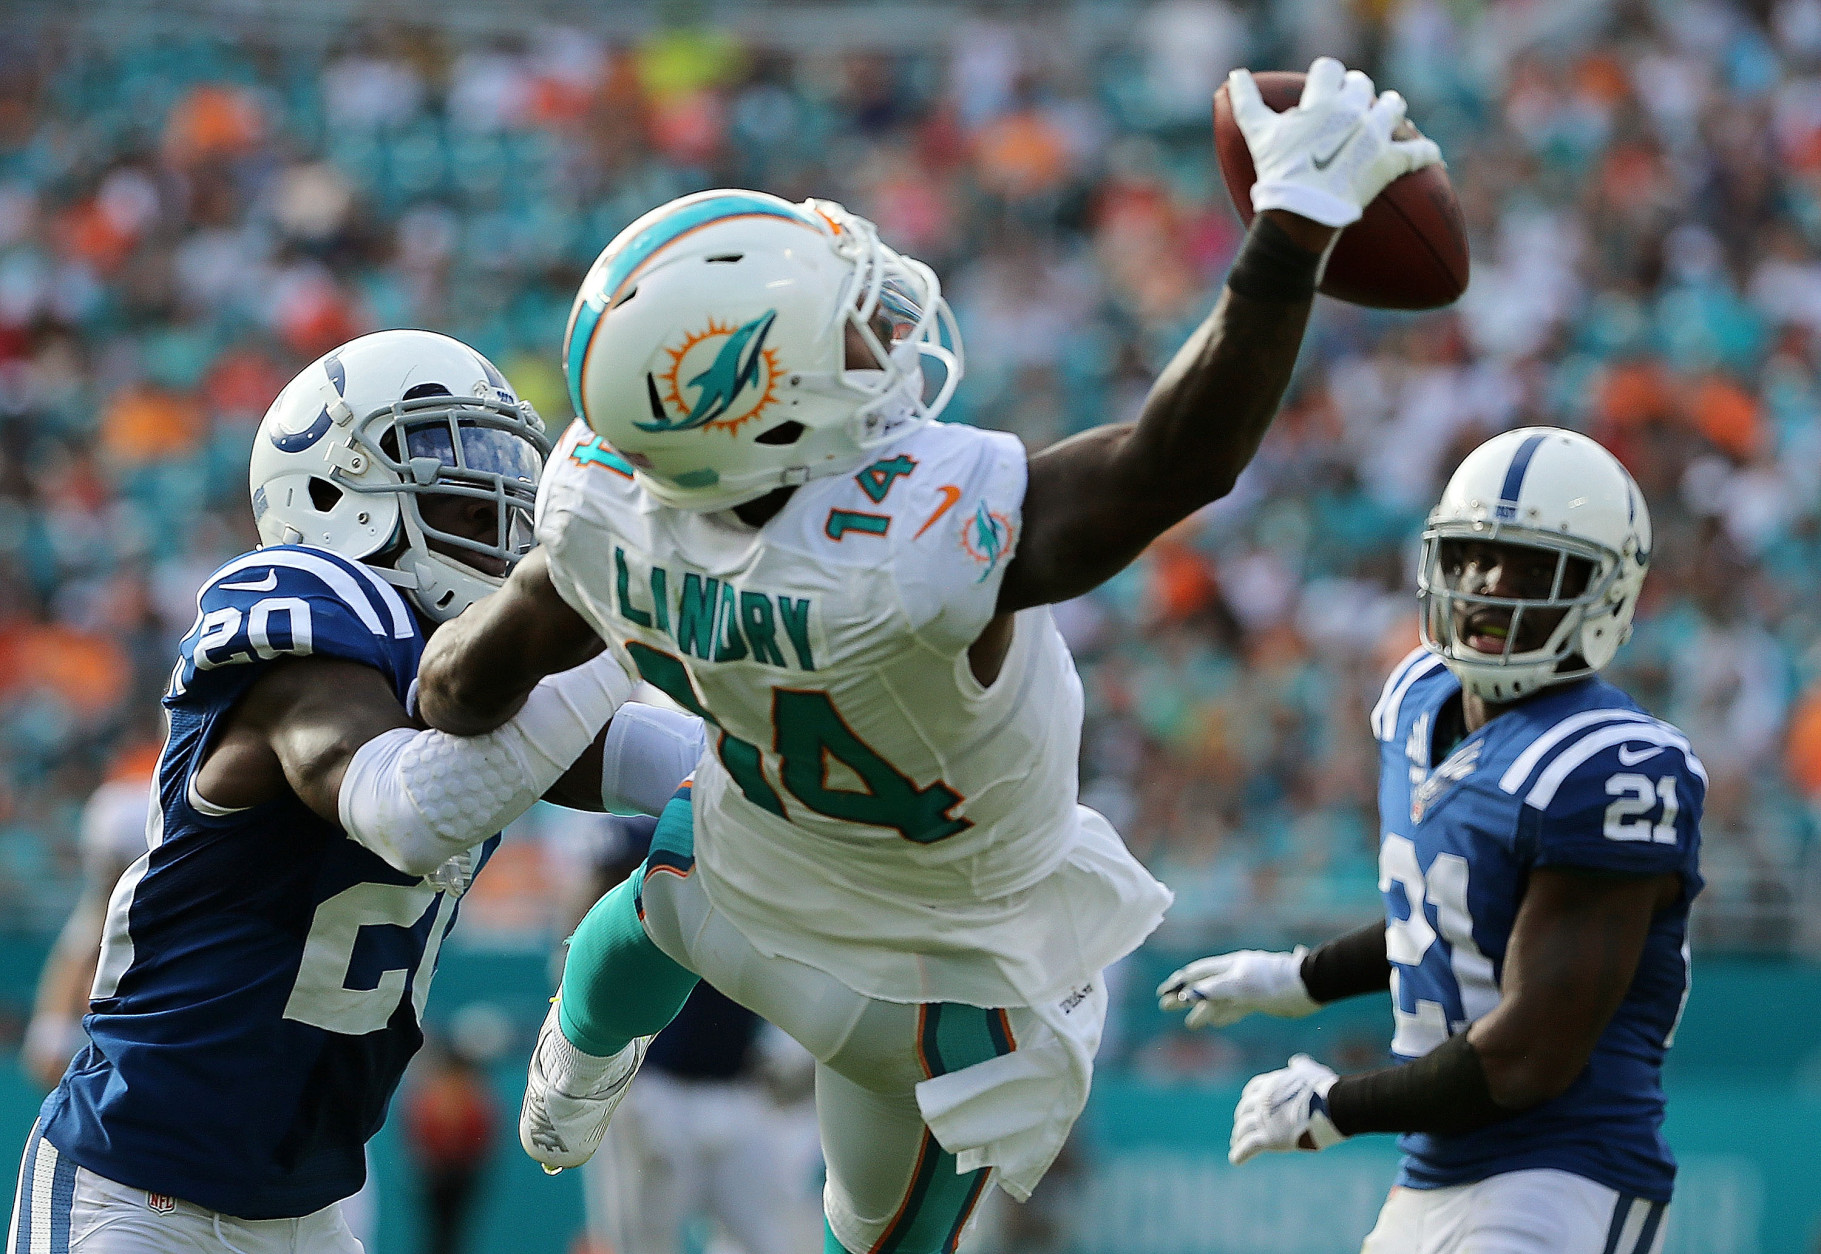 MIAMI GARDENS, FL - DECEMBER 27:  Jarvis Landry #14 of the Miami Dolphins makes a one handed catch during a game against the Indianapolis Colts at Sun Life Stadium on December 27, 2015 in Miami Gardens, Florida.  (Photo by Mike Ehrmann/Getty Images)